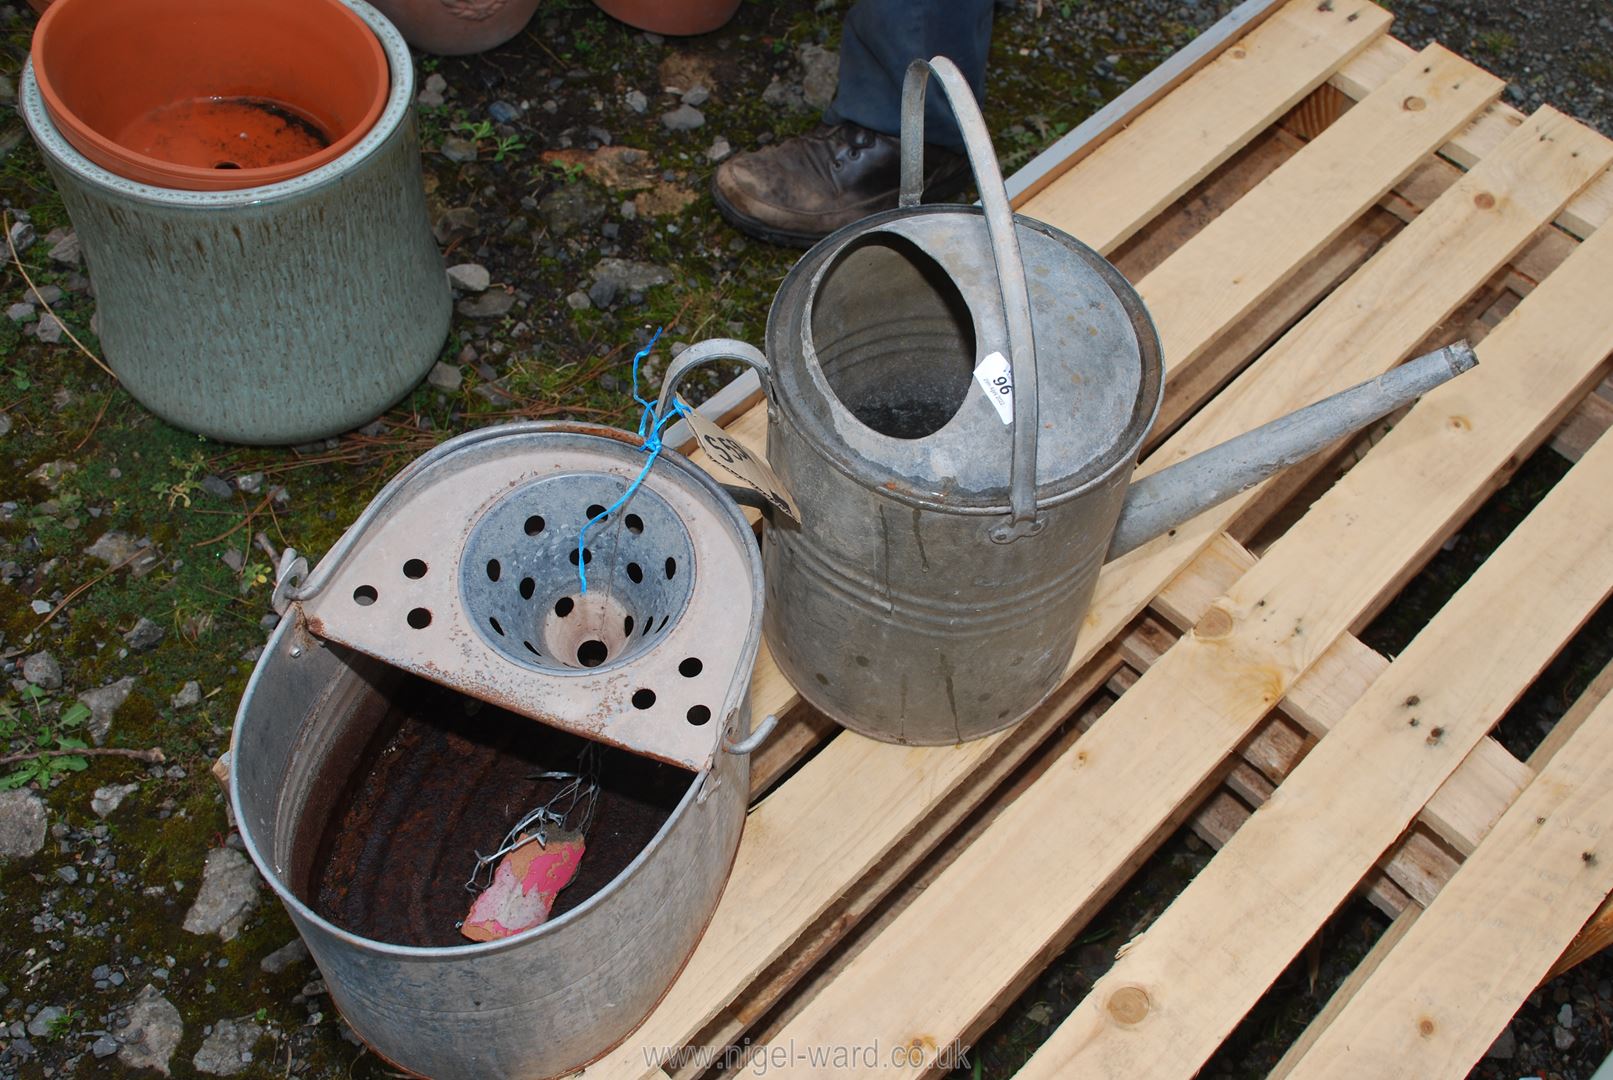 A galvanised mop pail and vintage watering can